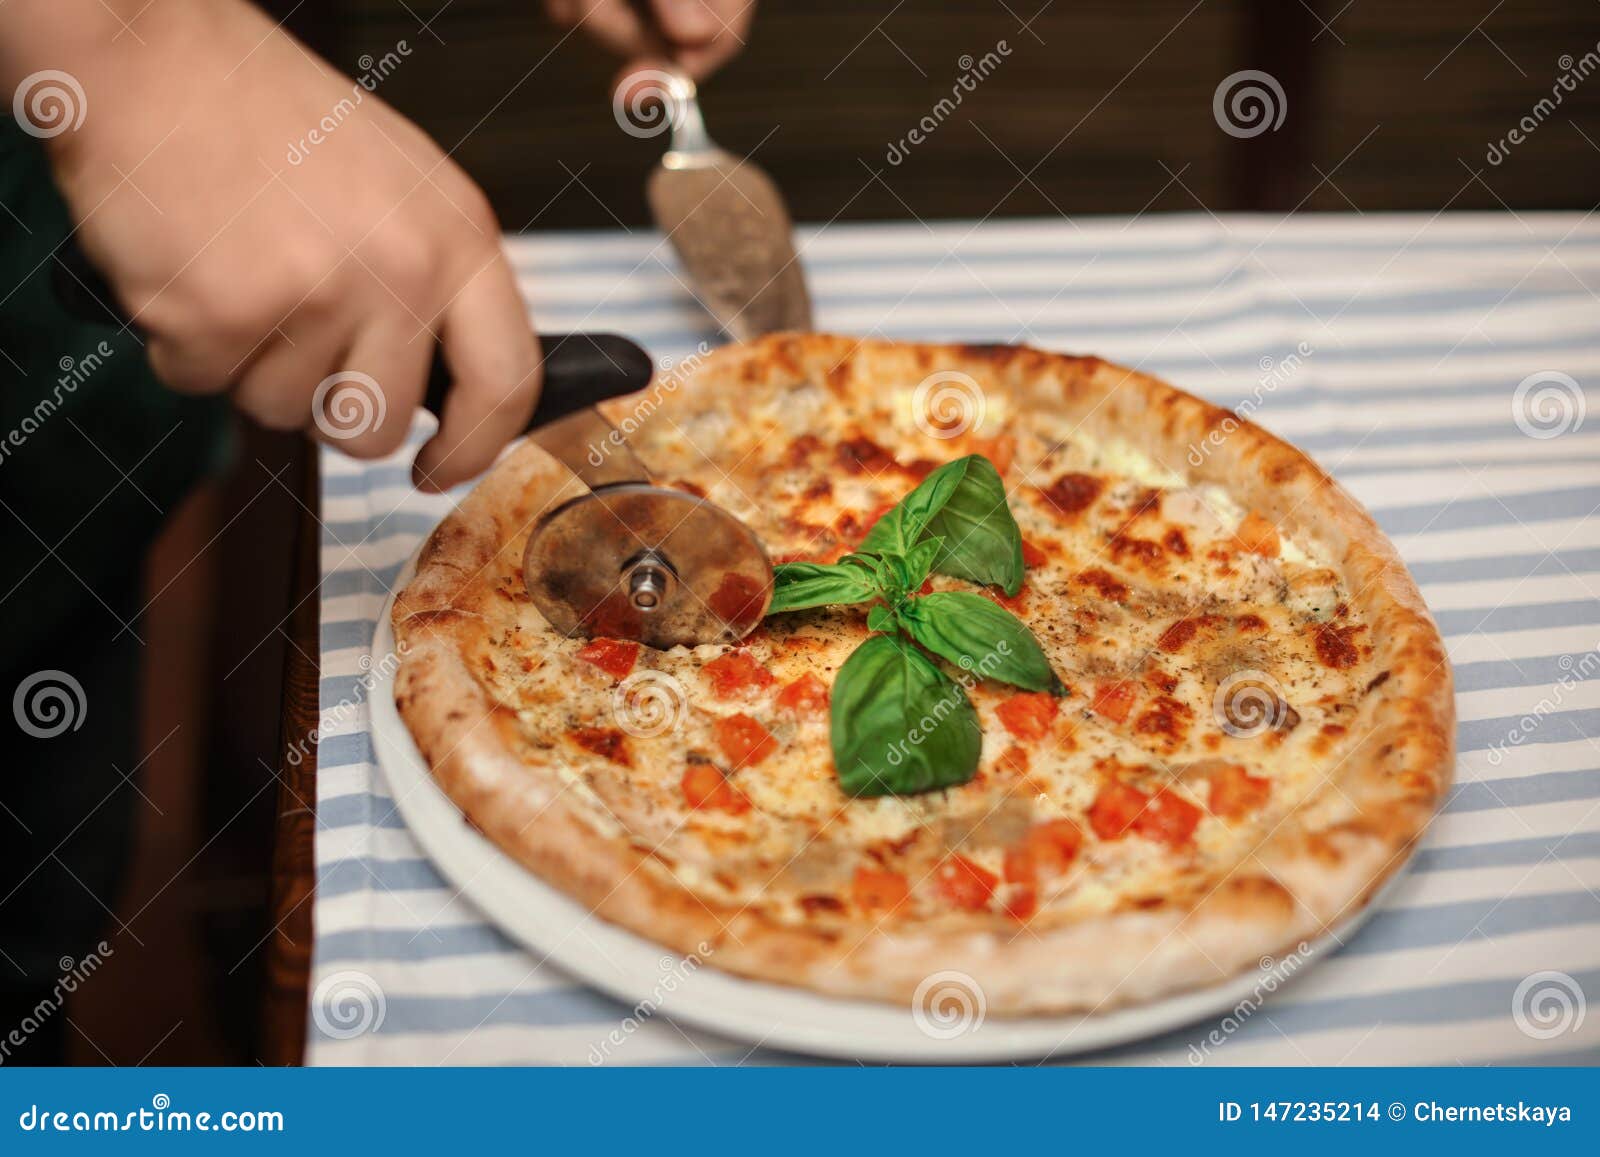 Man Cutting Tasty Oven Baked Pizza on Table Stock Photo - Image of ...